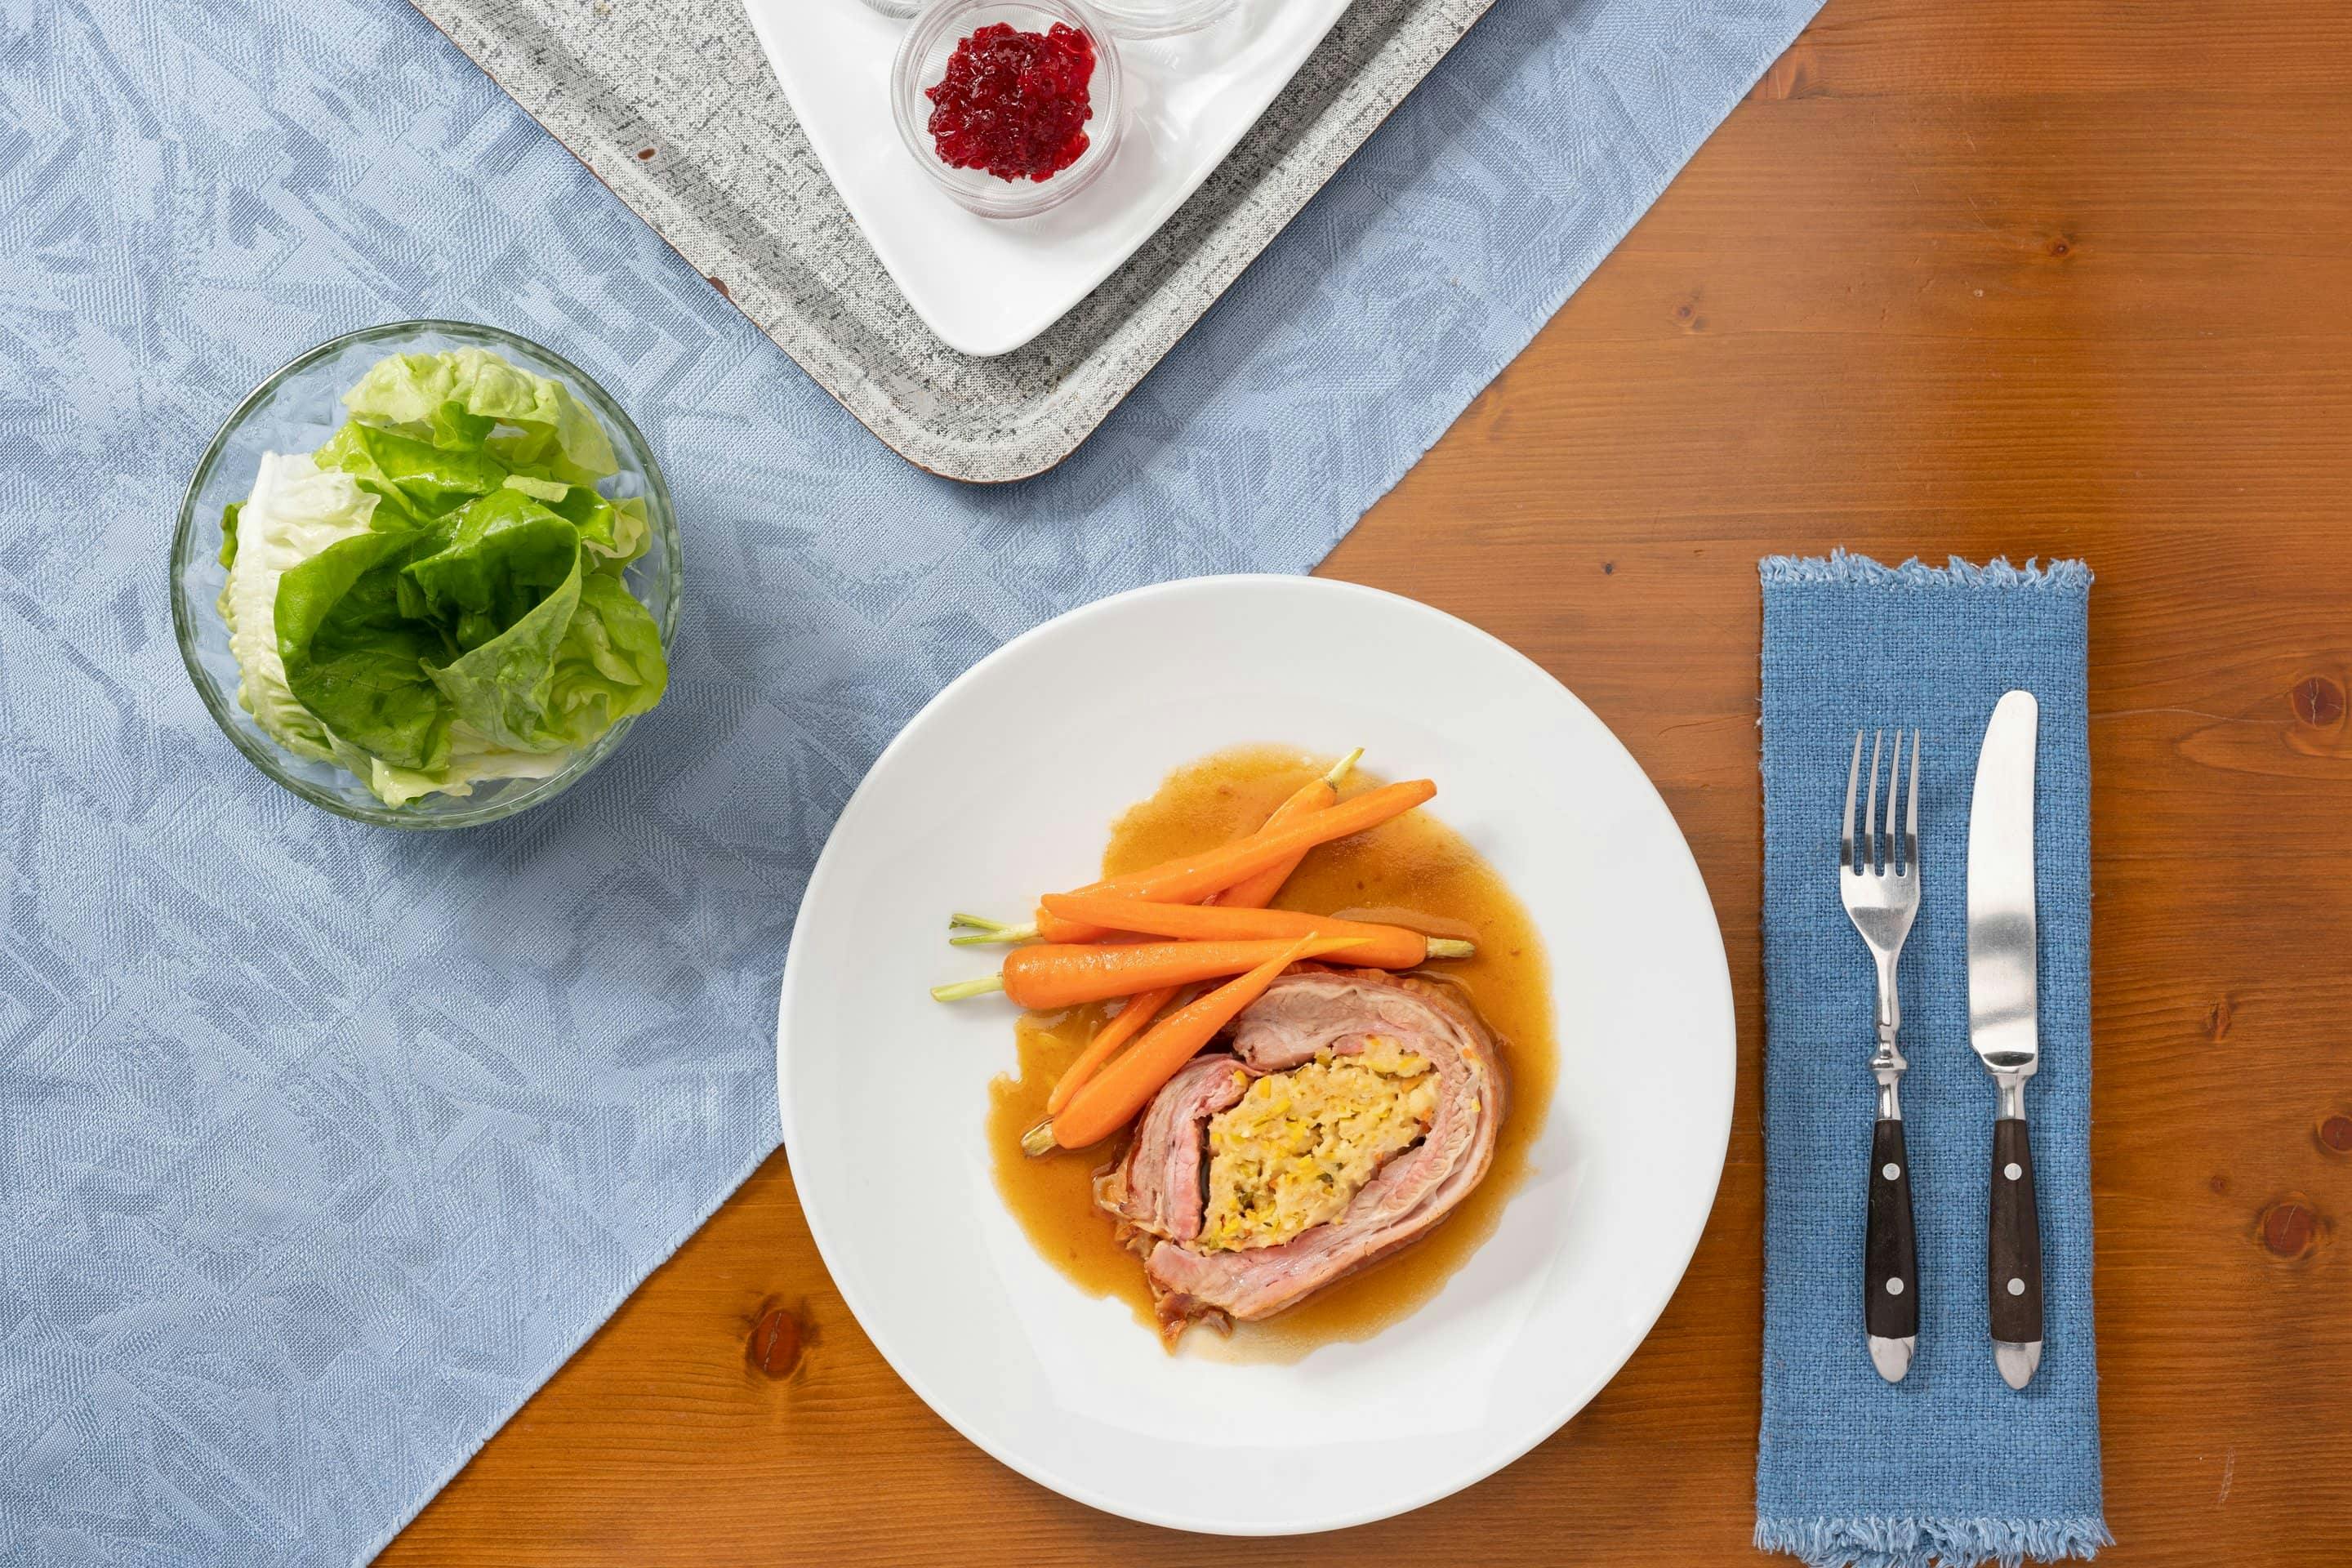 Two pieces of stuffed veal breast with glazed carrots on a white plate.